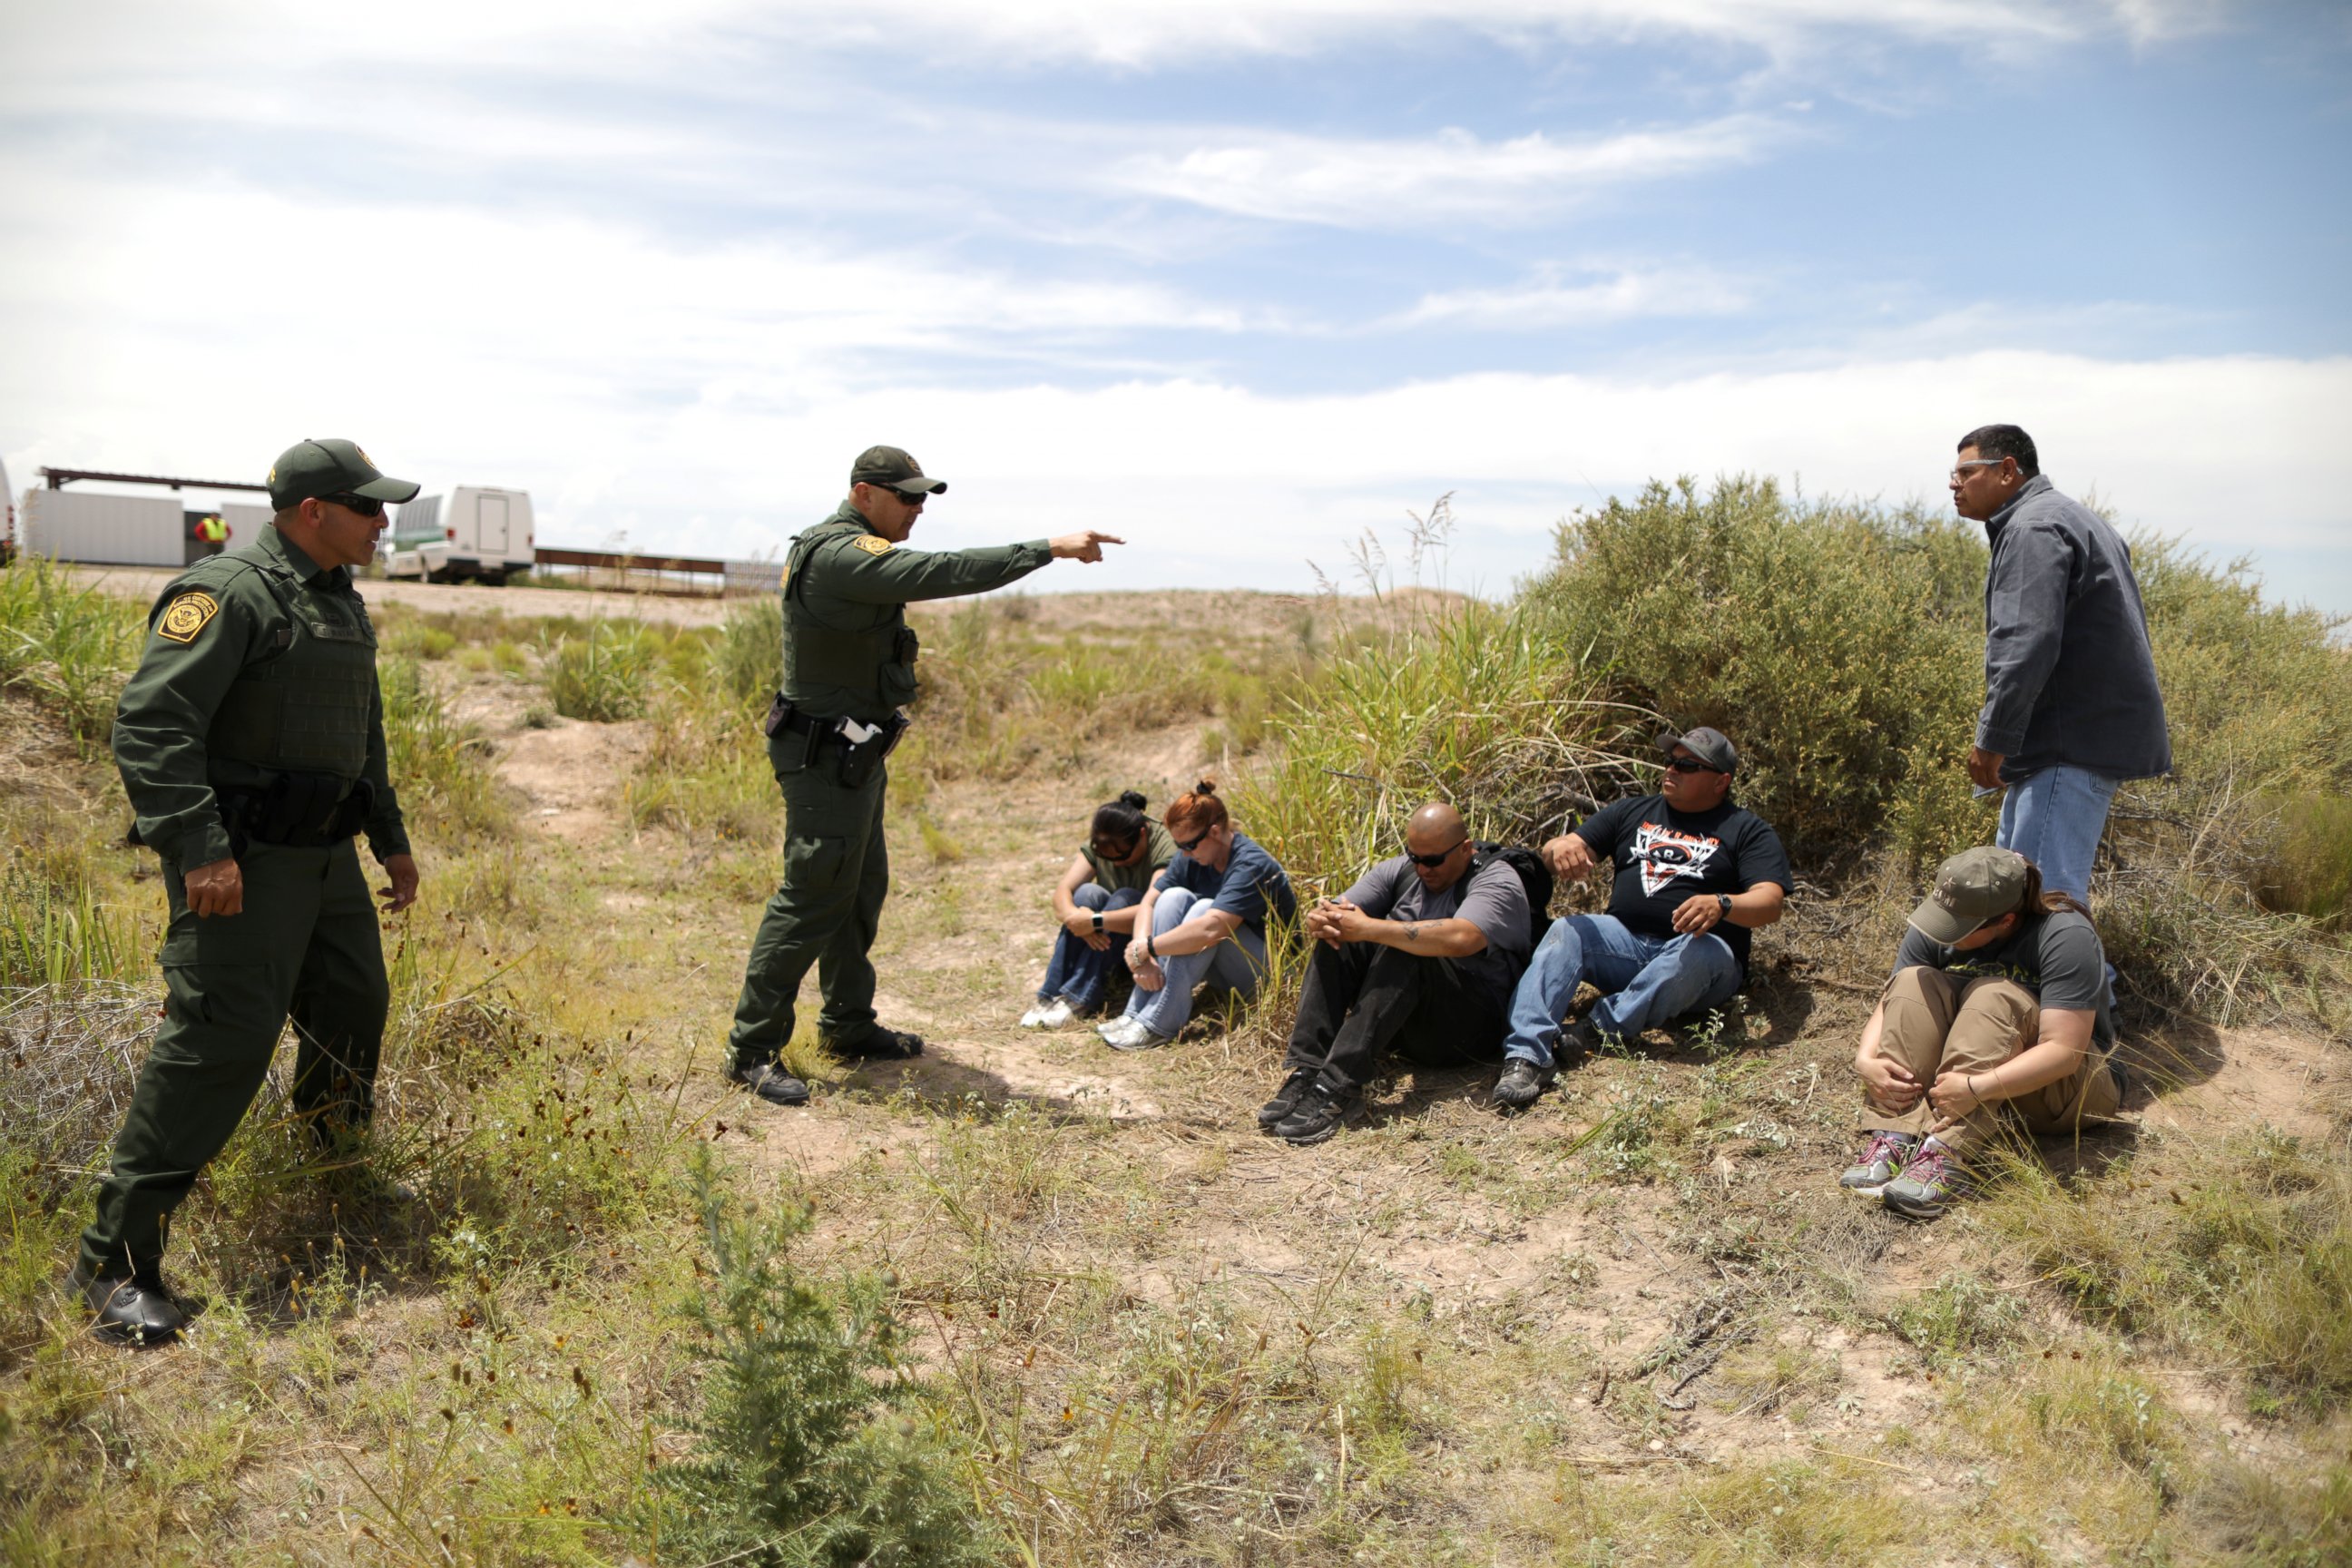 PHOTO: Border patrol agents demonstrate a training exercise with actors playing the roles of migrants at the United States Border Patrol Academy in Artesia, New Mexico, June 8, 2017. 